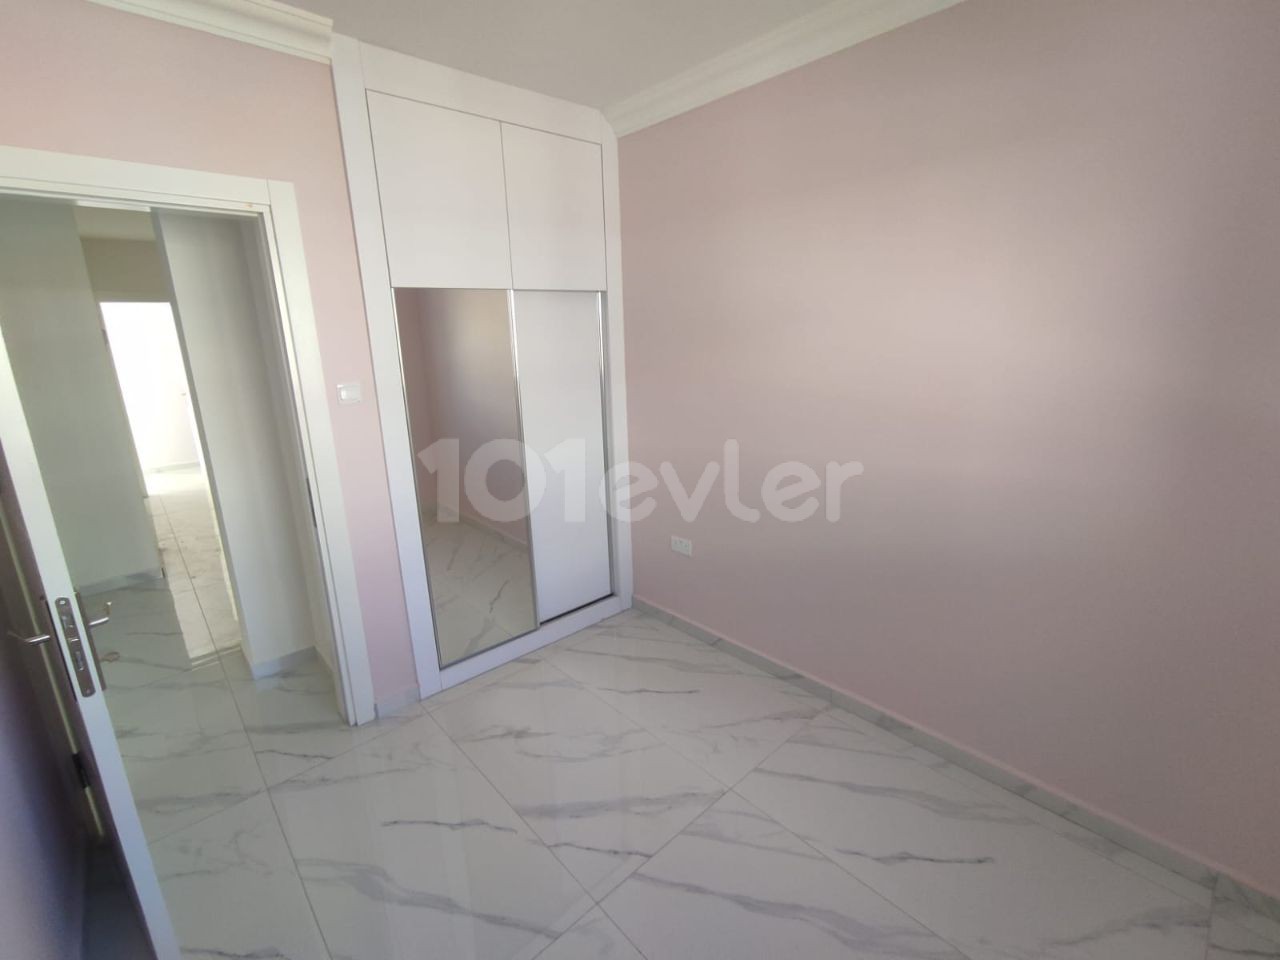 FURNISHED 3+1 TWIN VILLA FOR RENT IN İSKELE CENTRAL